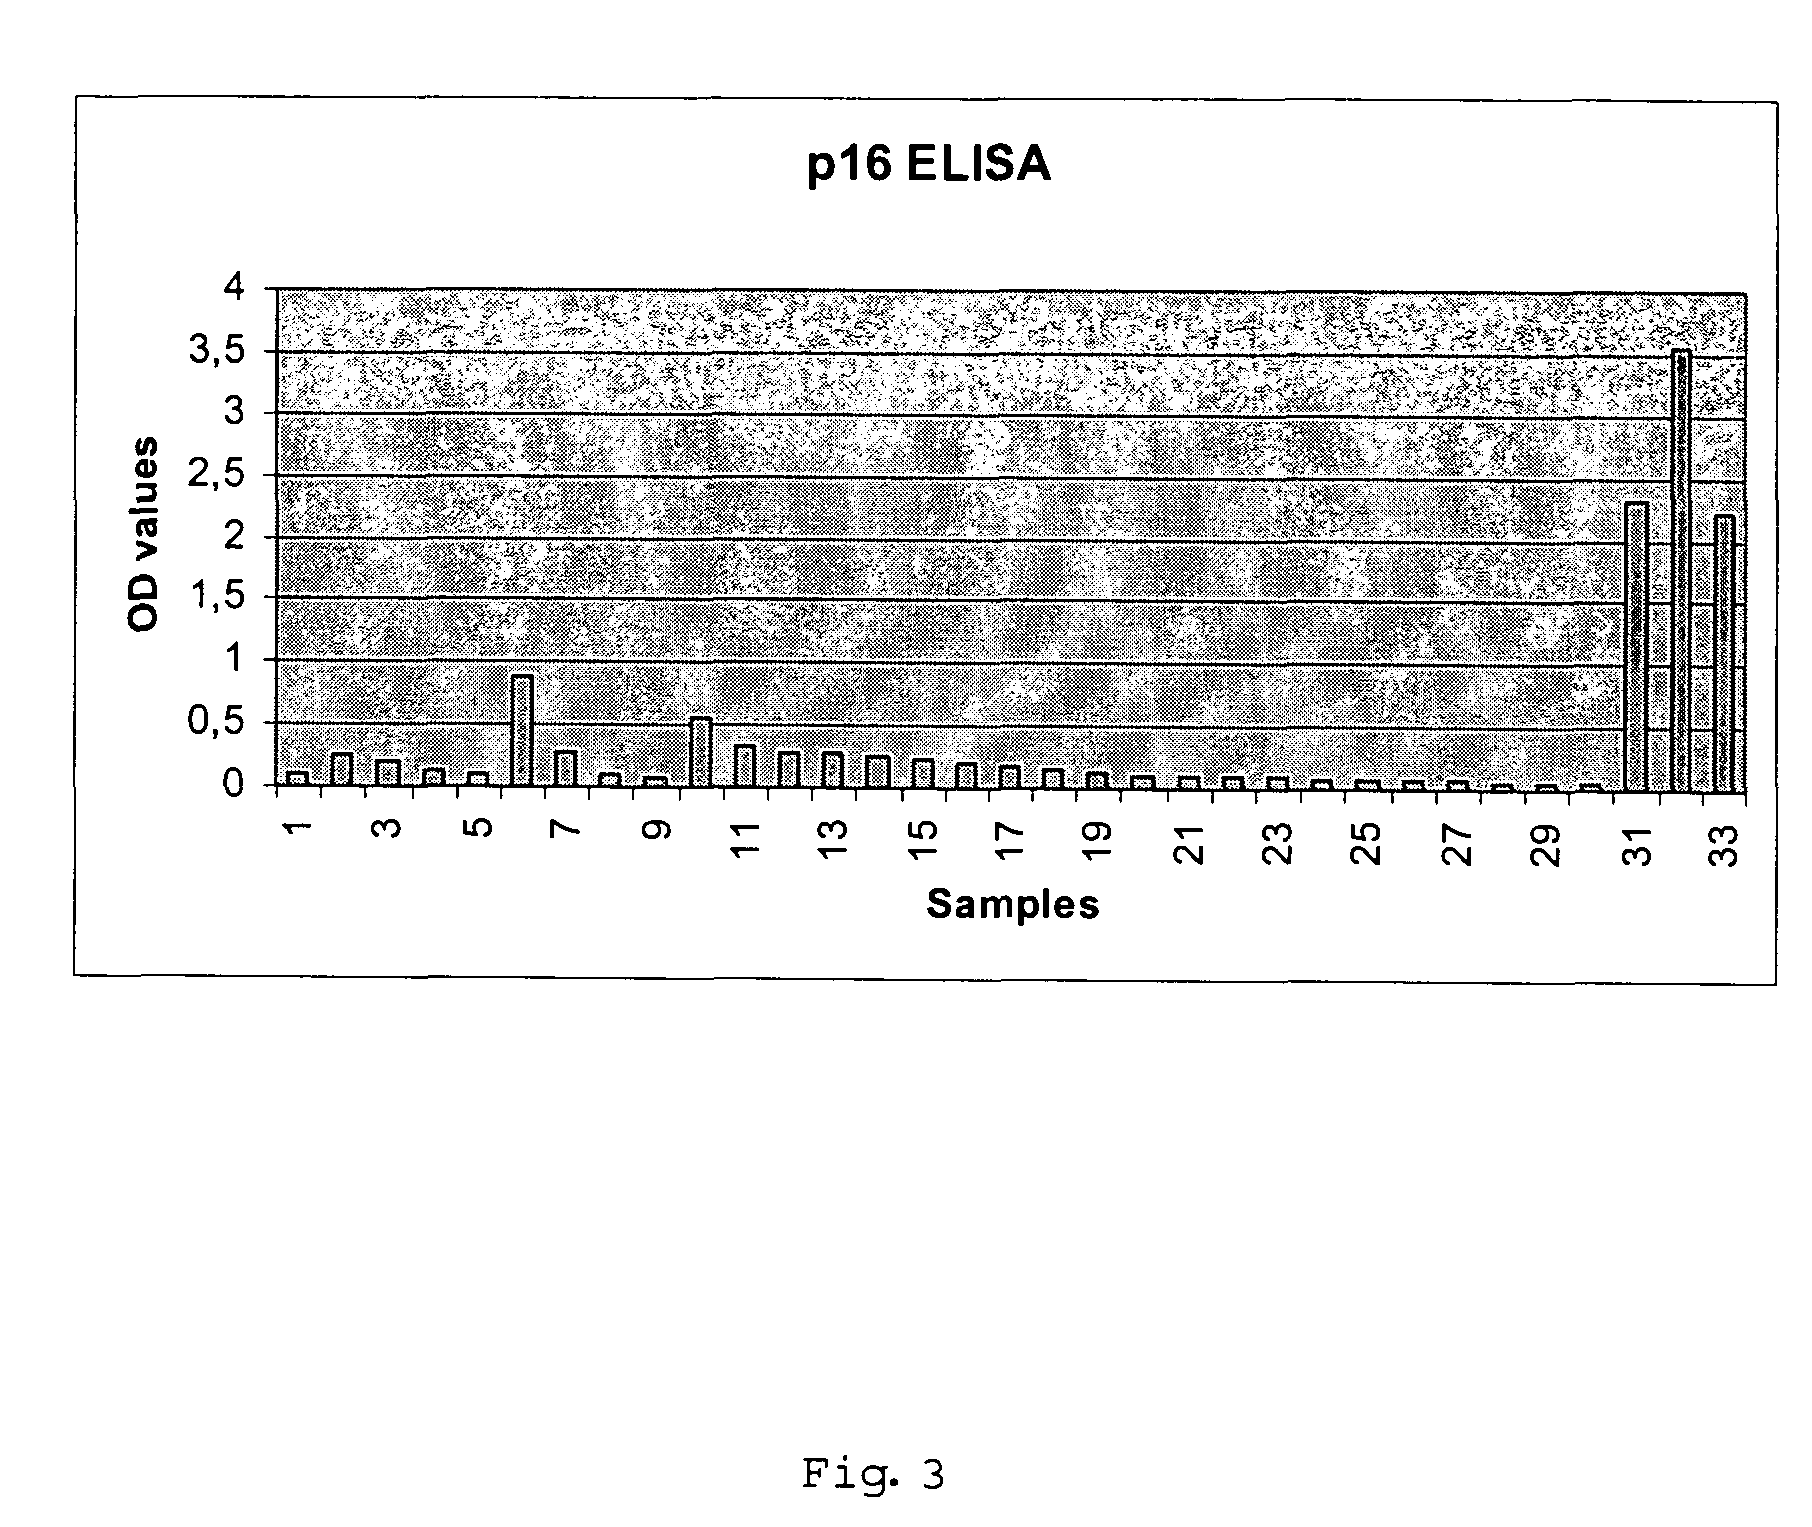 Method for detecting carcinomas in a solubilized cervical body sample